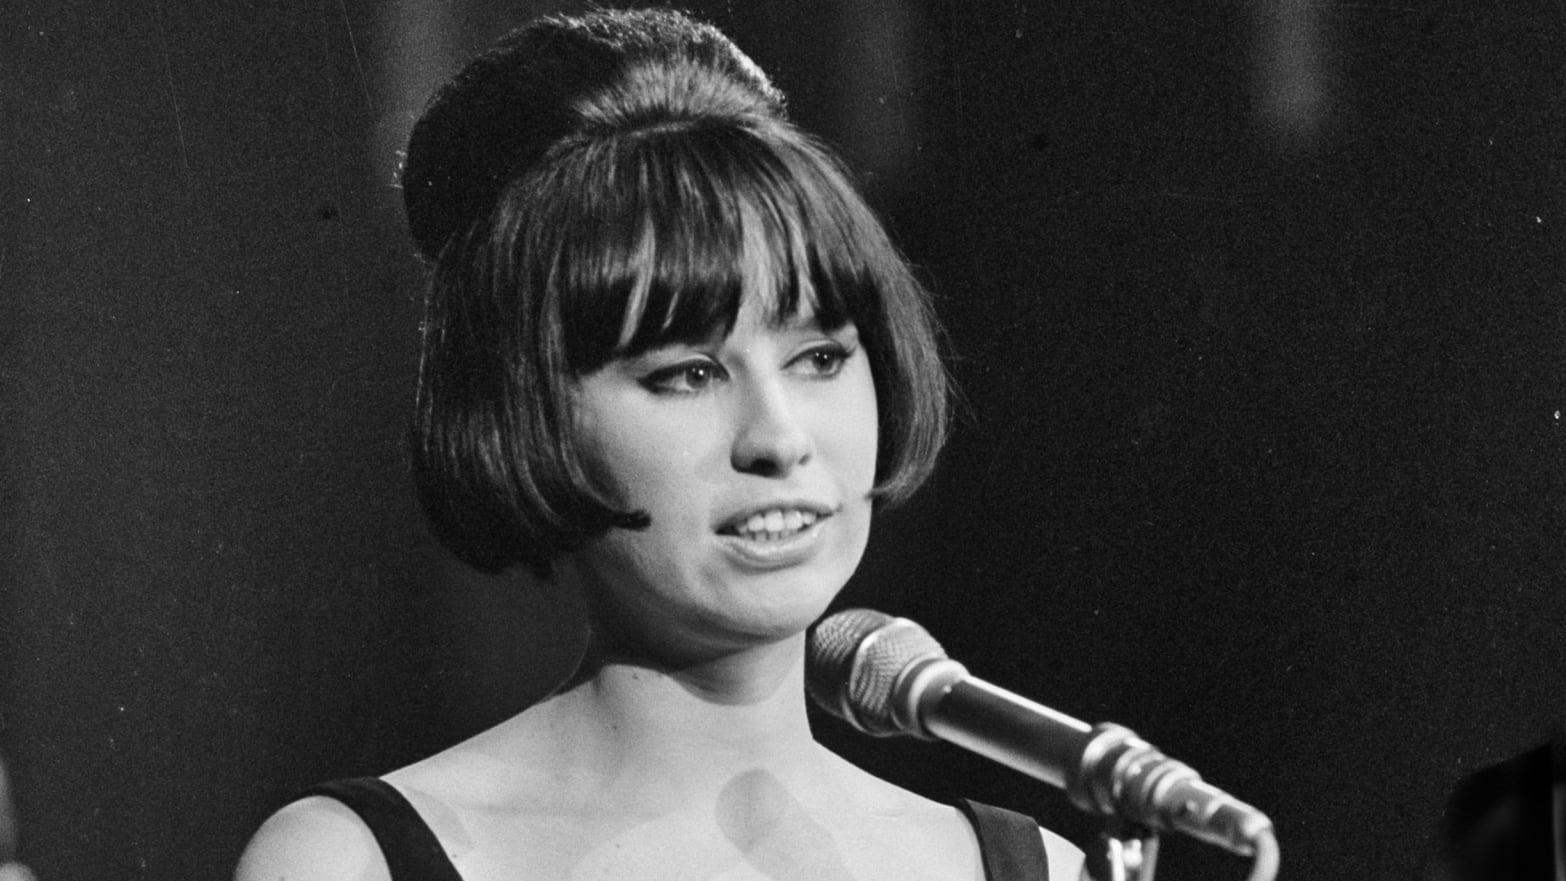 Brazilian Singer Astrud Gilberto, Known for 'The Girl from Ipanema', Dies at 83